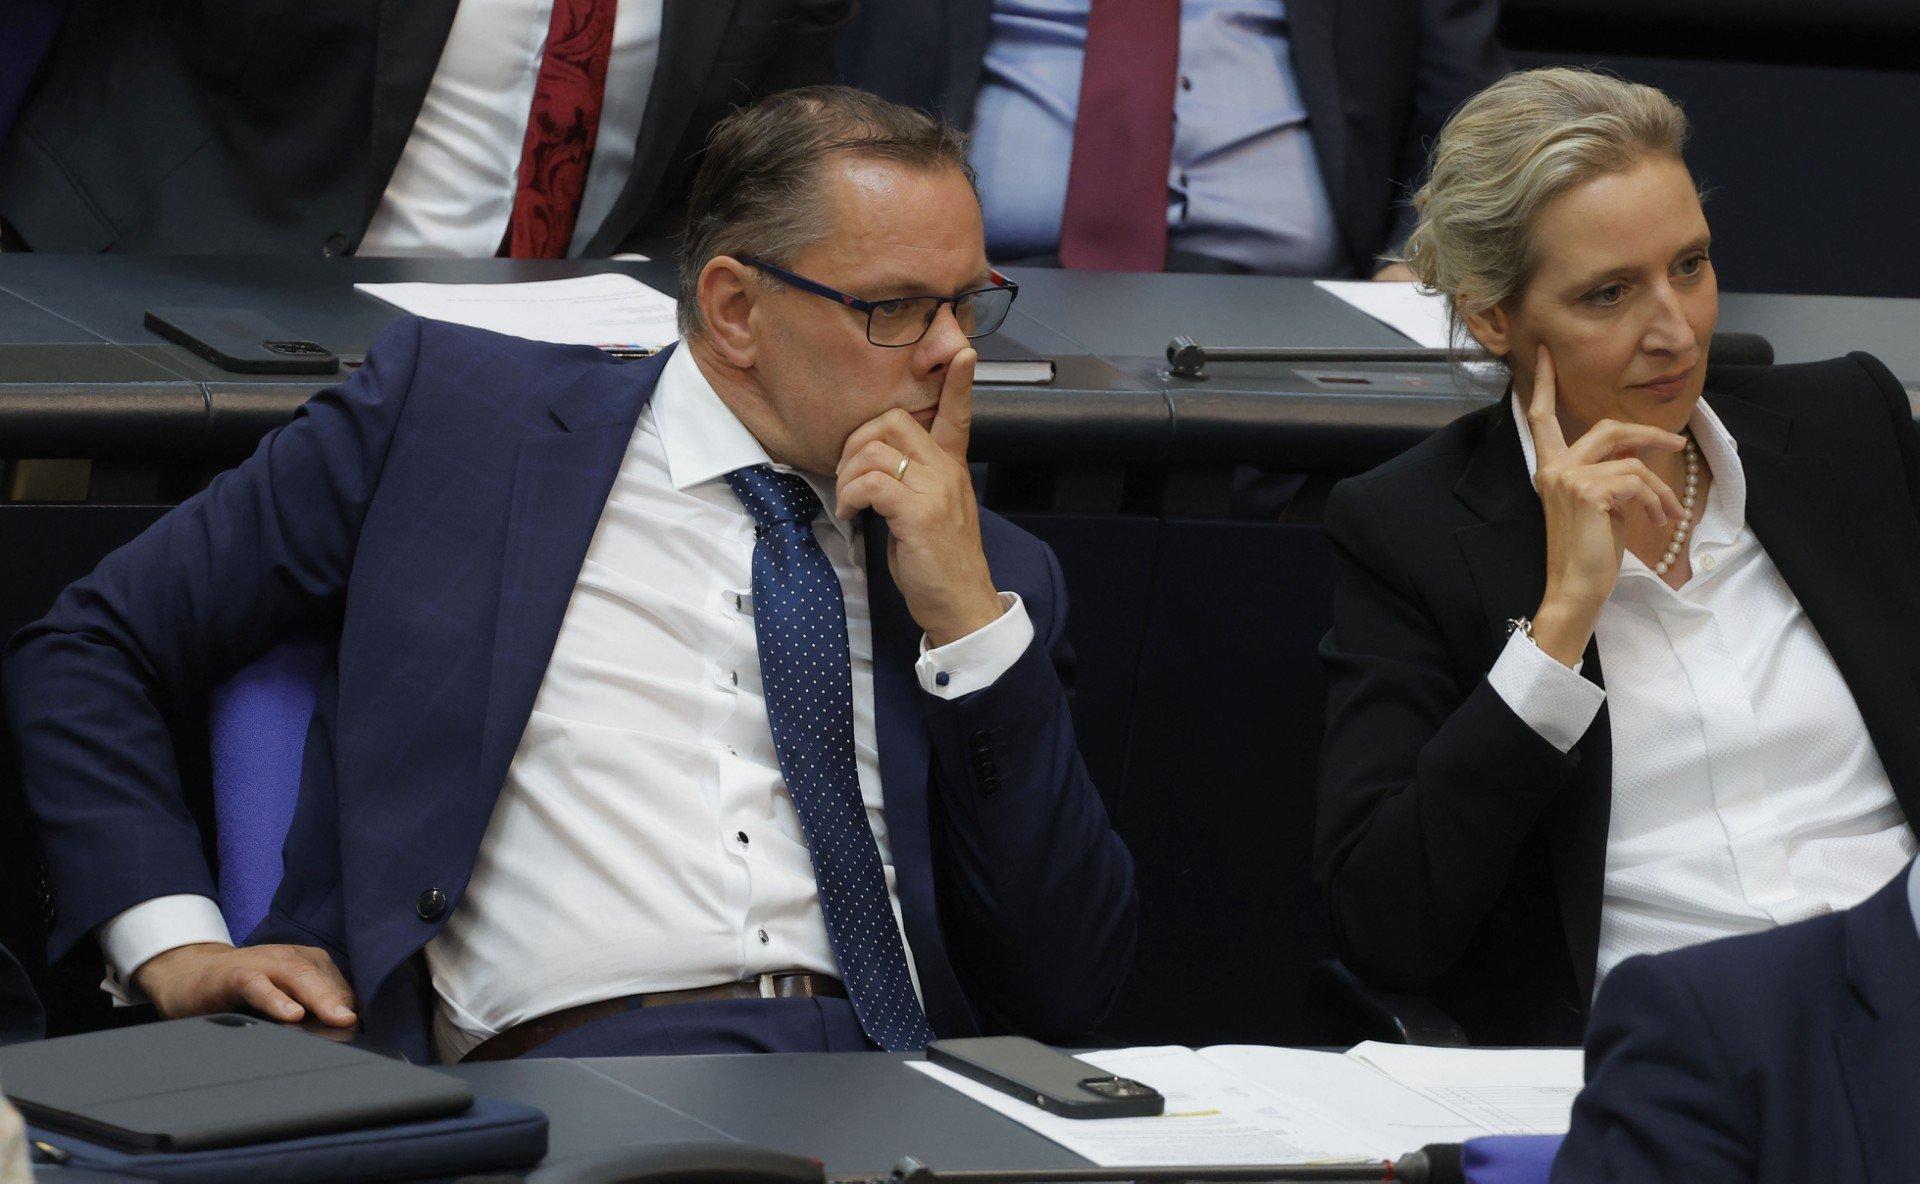 Alice Weidel (R) and Tino Chrupalla, both co-leaders and also parliamentary group co-leaders of the far-right Alternative for Germany (AfD) party, attend a debate on June 22, 2023 at the Bundestag, the lower house of parliament, in Berlin, ahead of the EU summit. (Photo by Odd ANDERSEN / AFP)